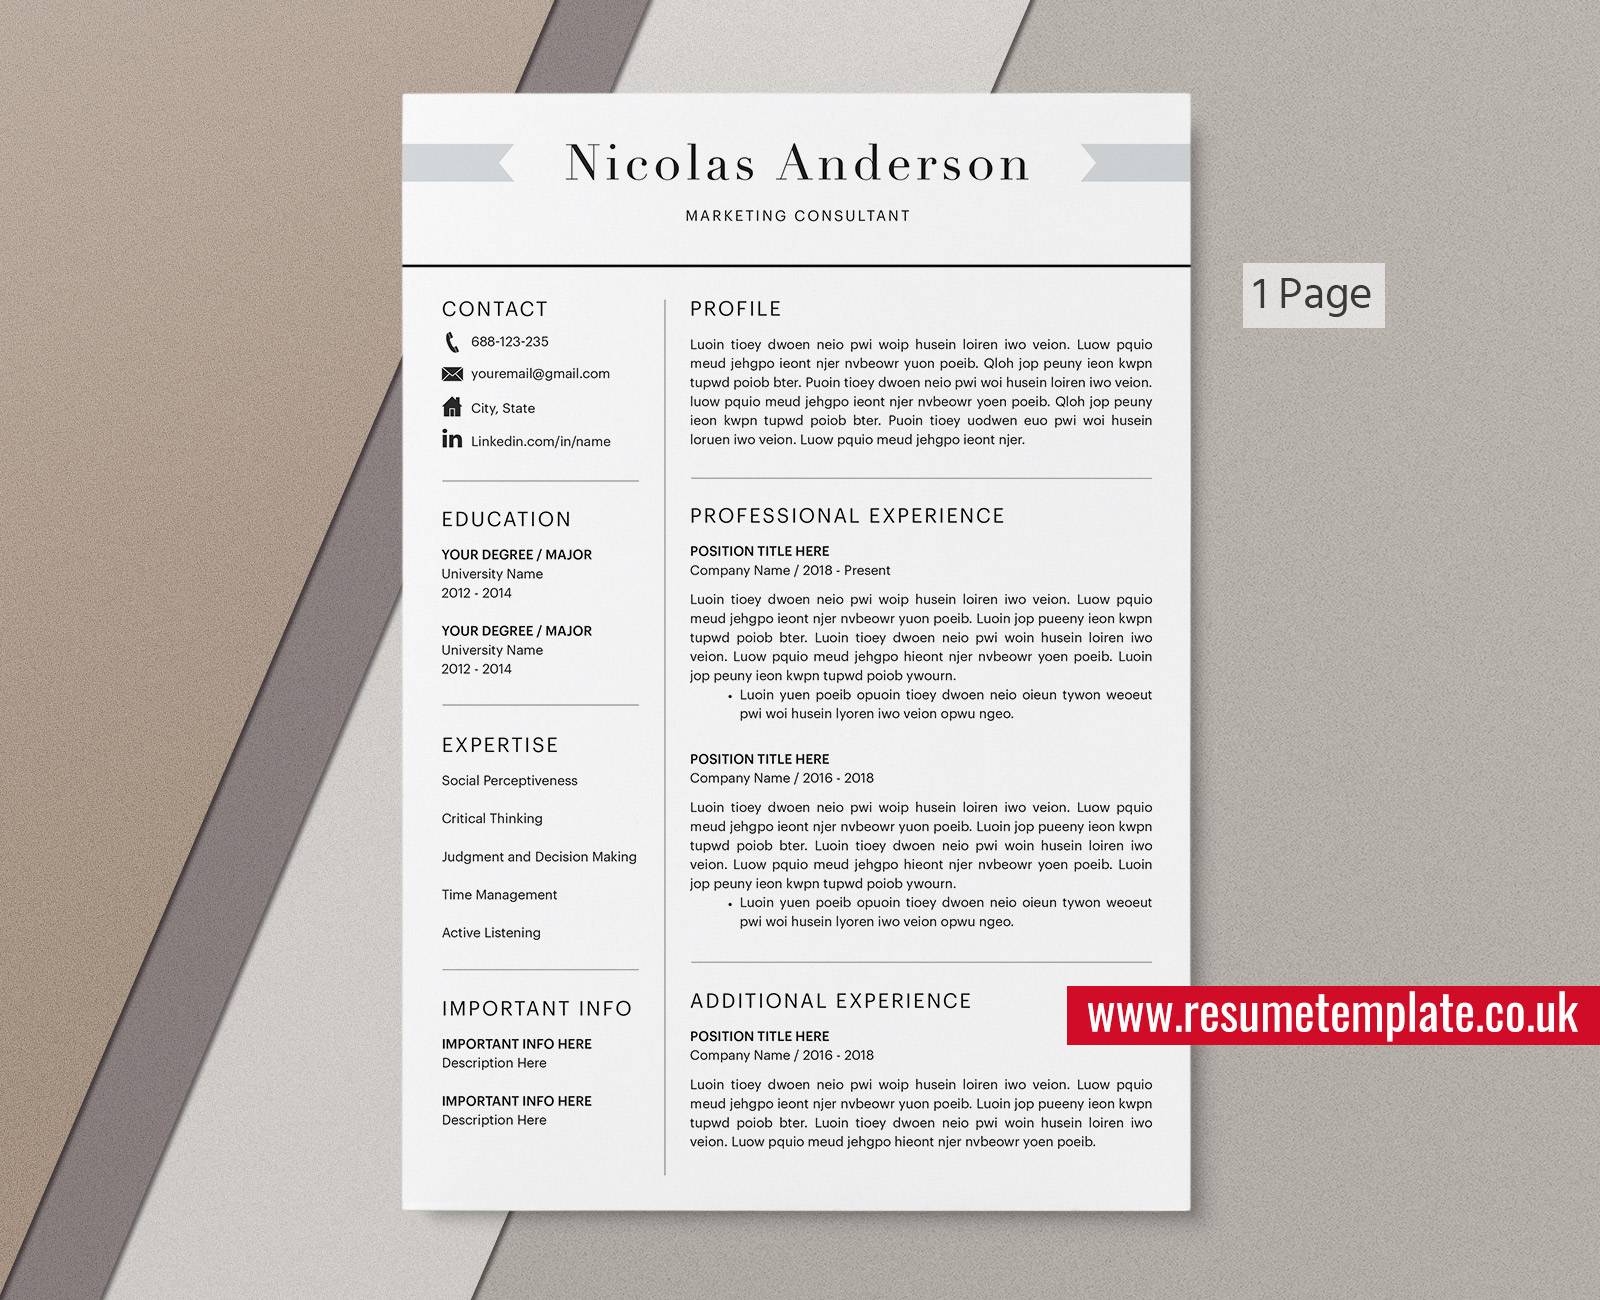 Mac Pages Student Resume Cv Template Cover Letter And References Minimalist Cv Design Professional Resume Modern Resume First Job Resume Instant Download Resumetemplate Co Uk